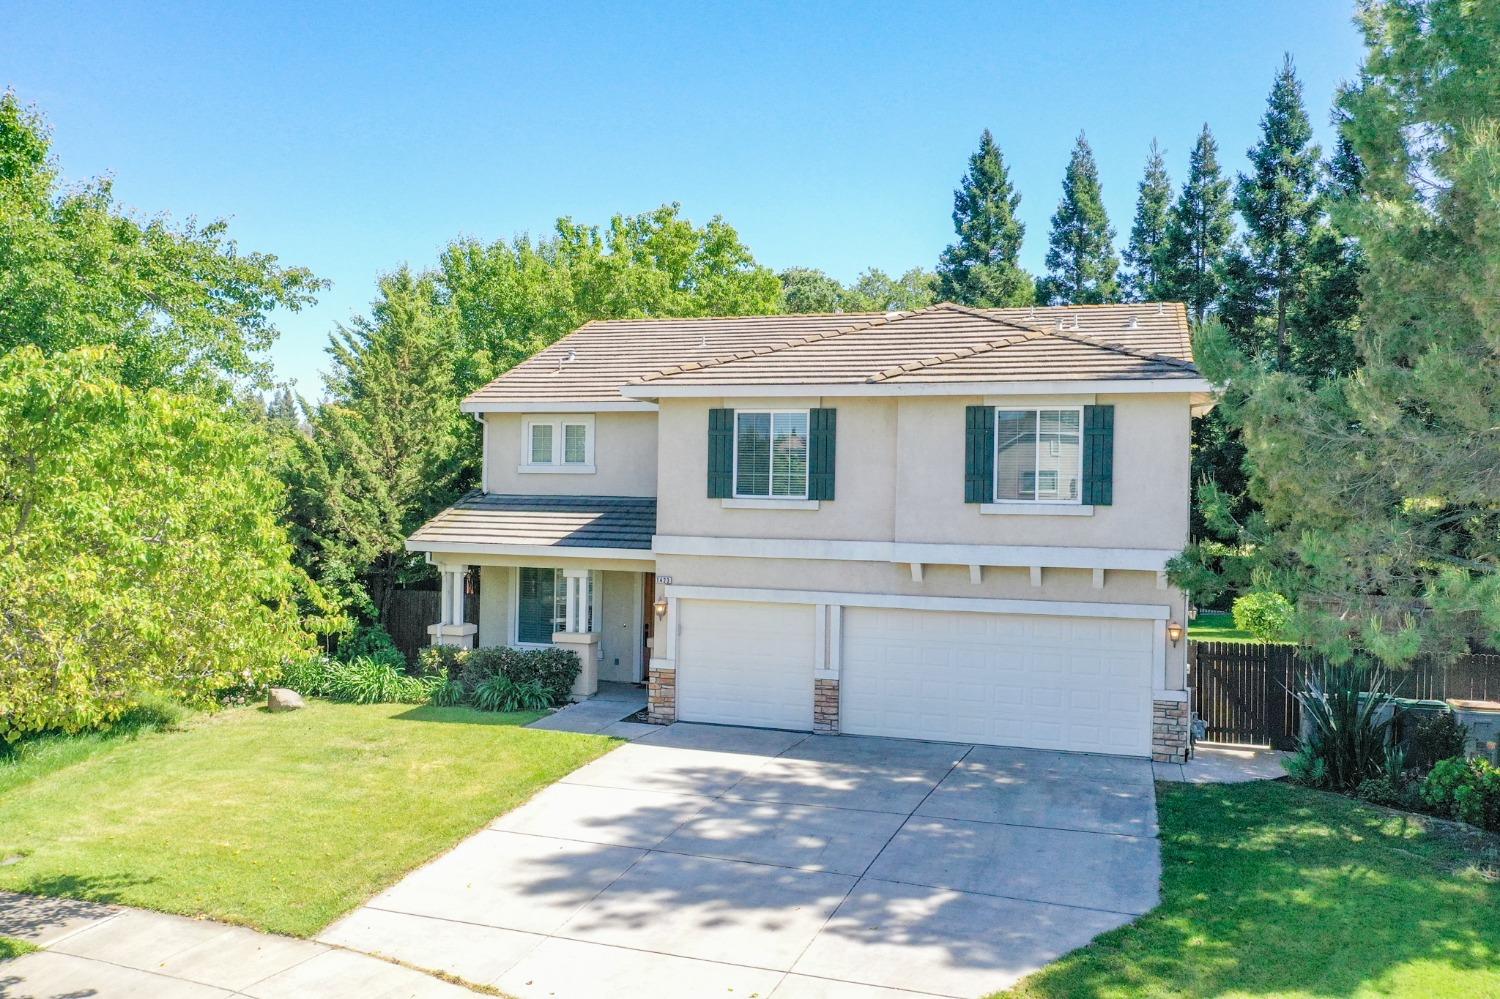 Photo of 1423 Limewood Rd in West Sacramento, CA